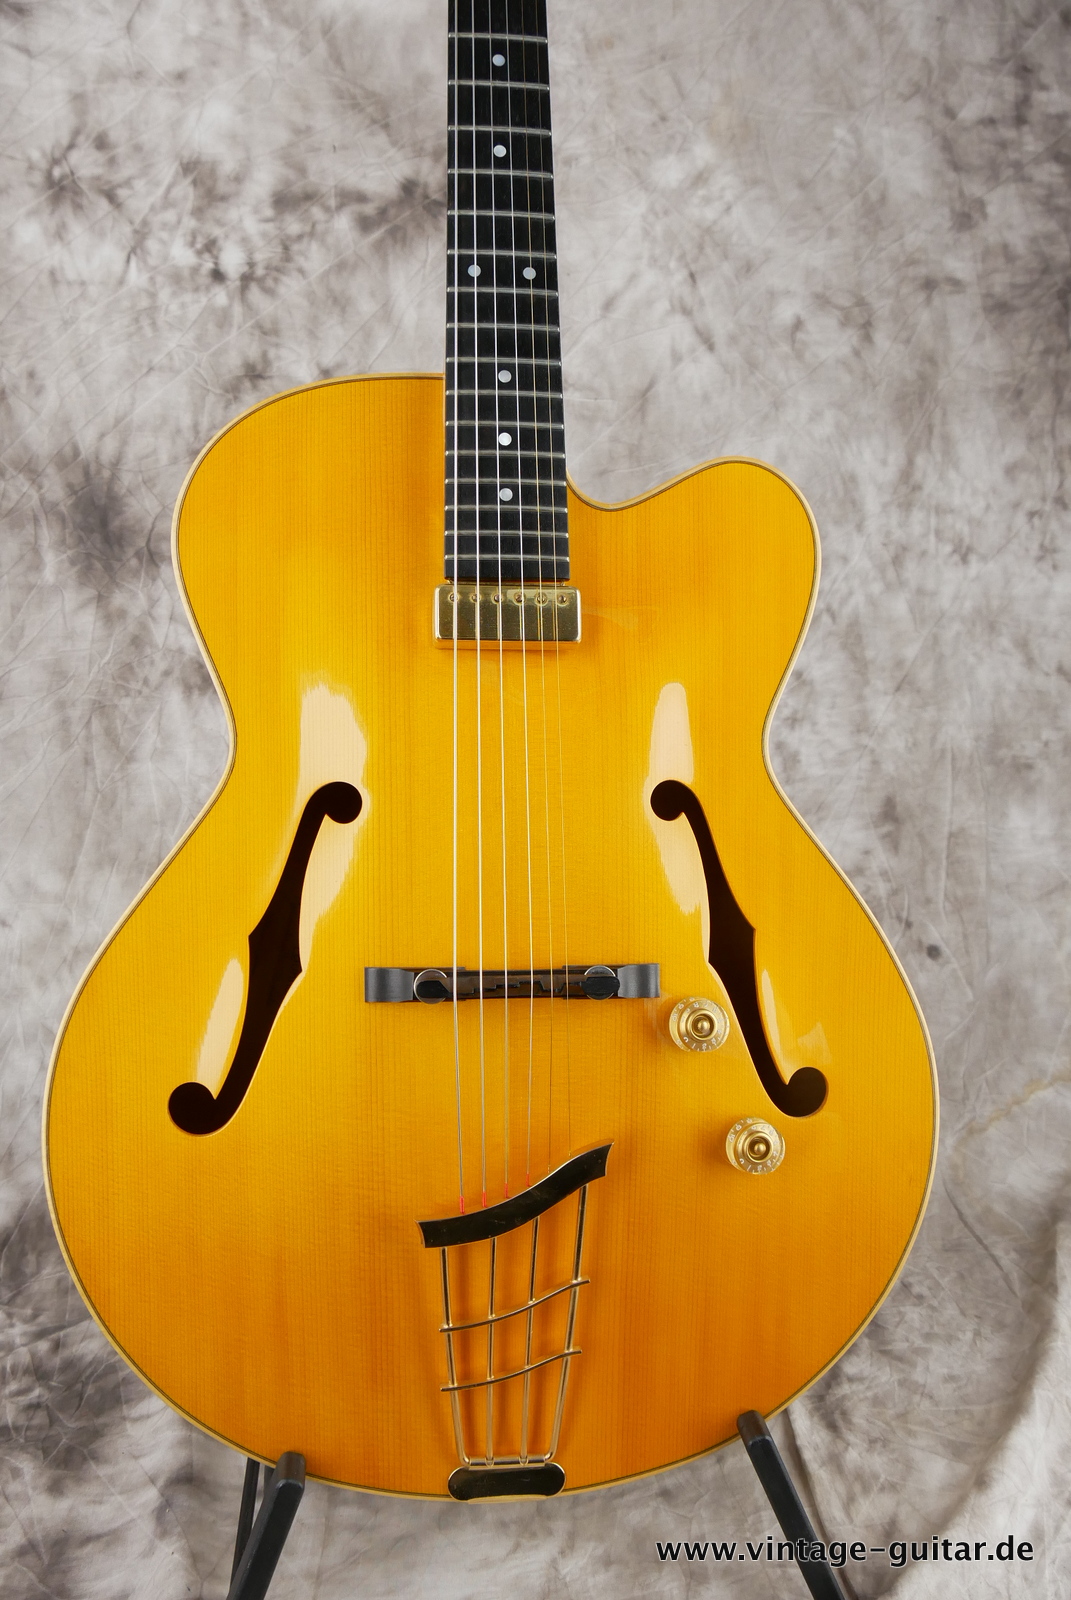 Launhardt_Fs3_german_guitar_archtop_all_solid-003.JPG